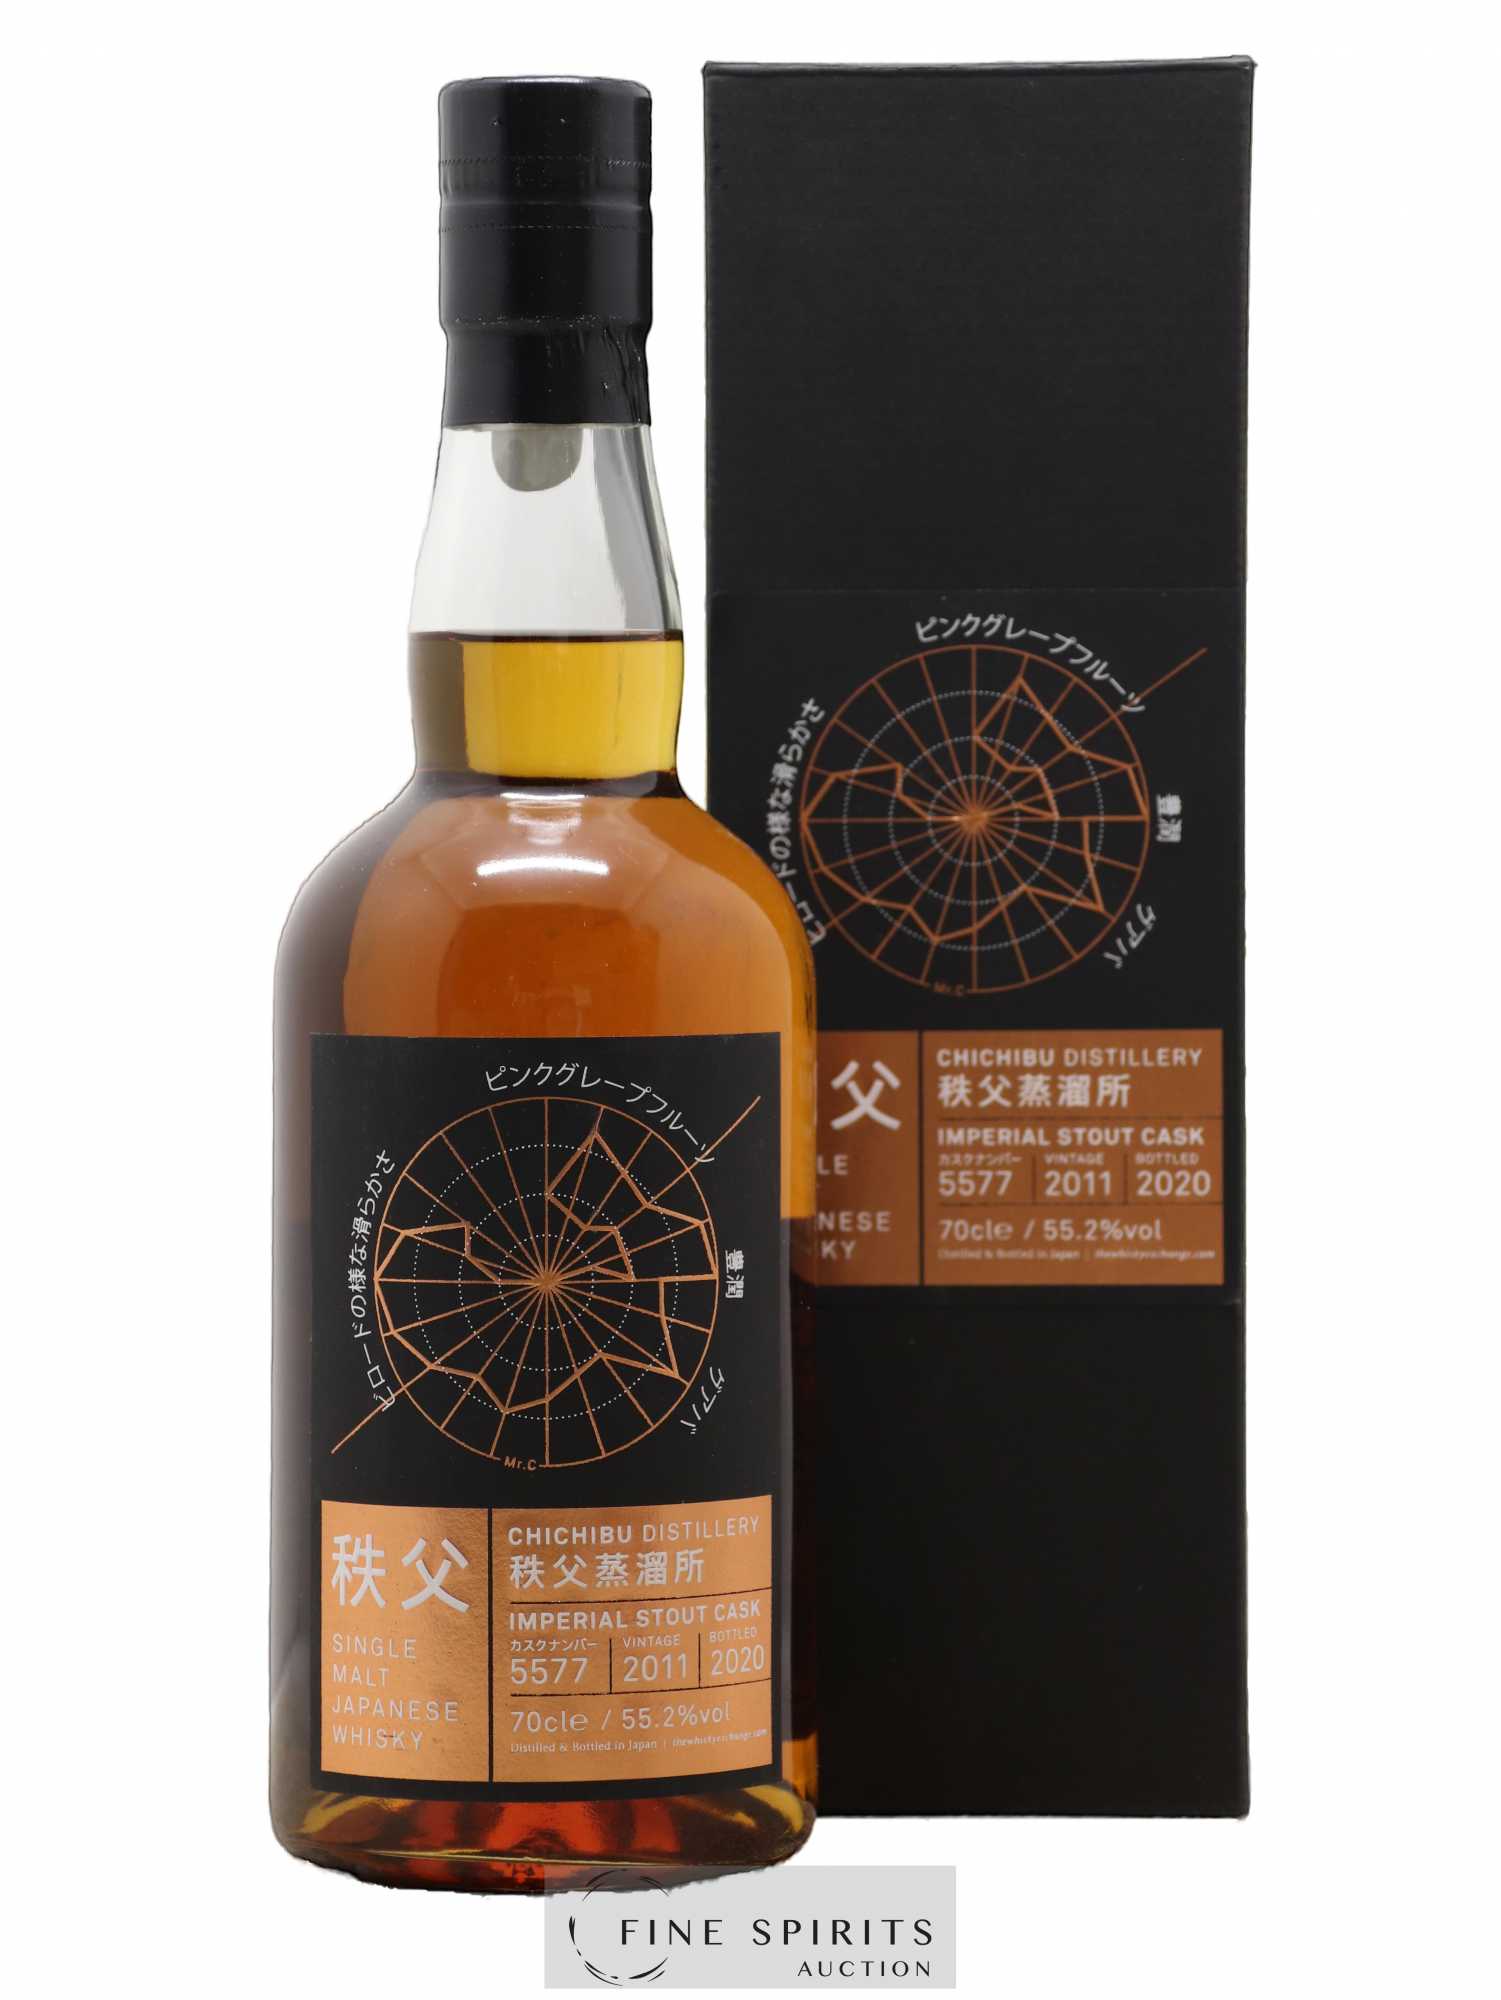 Chichibu 2011 Of. Imperial Stout Cask n°5577 - One of 224 - bottled 2020 The Whisky Exchange Ichiro's Malt 